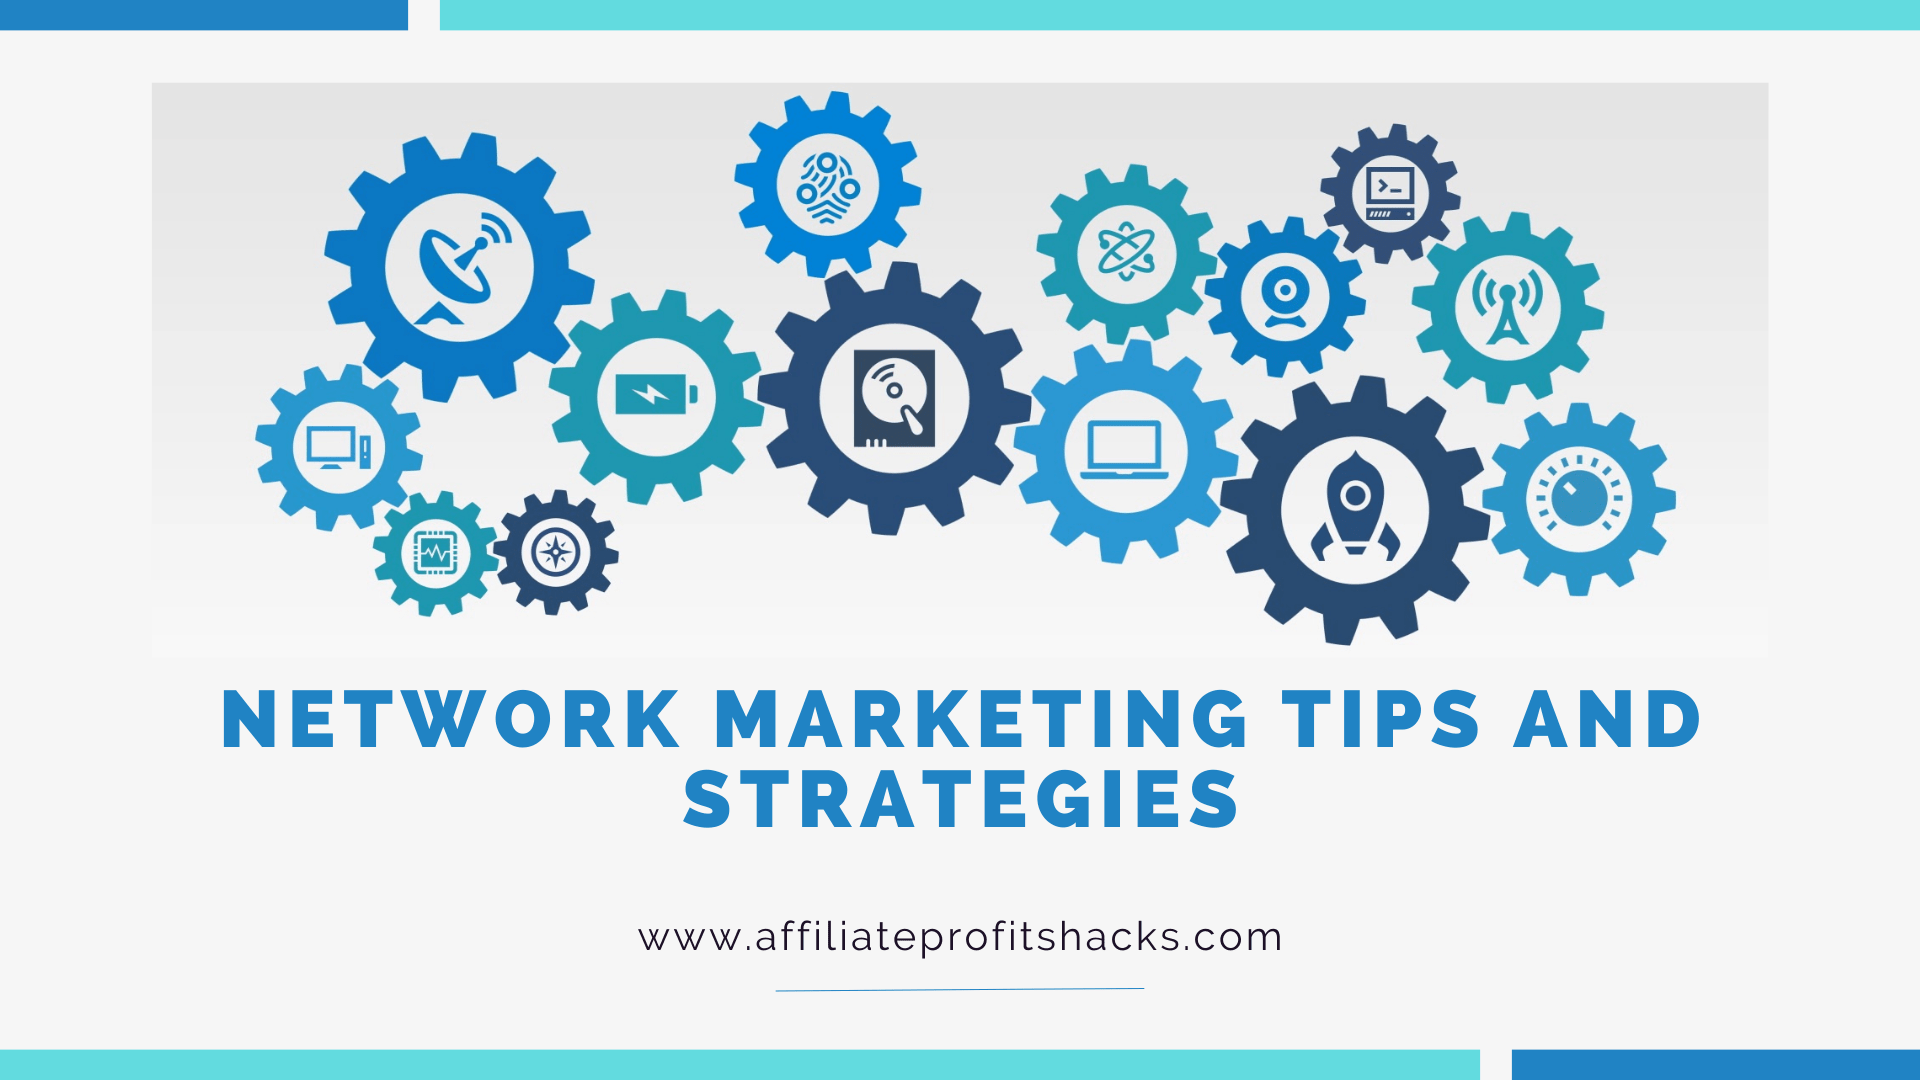 Network Marketing Tips and Strategies